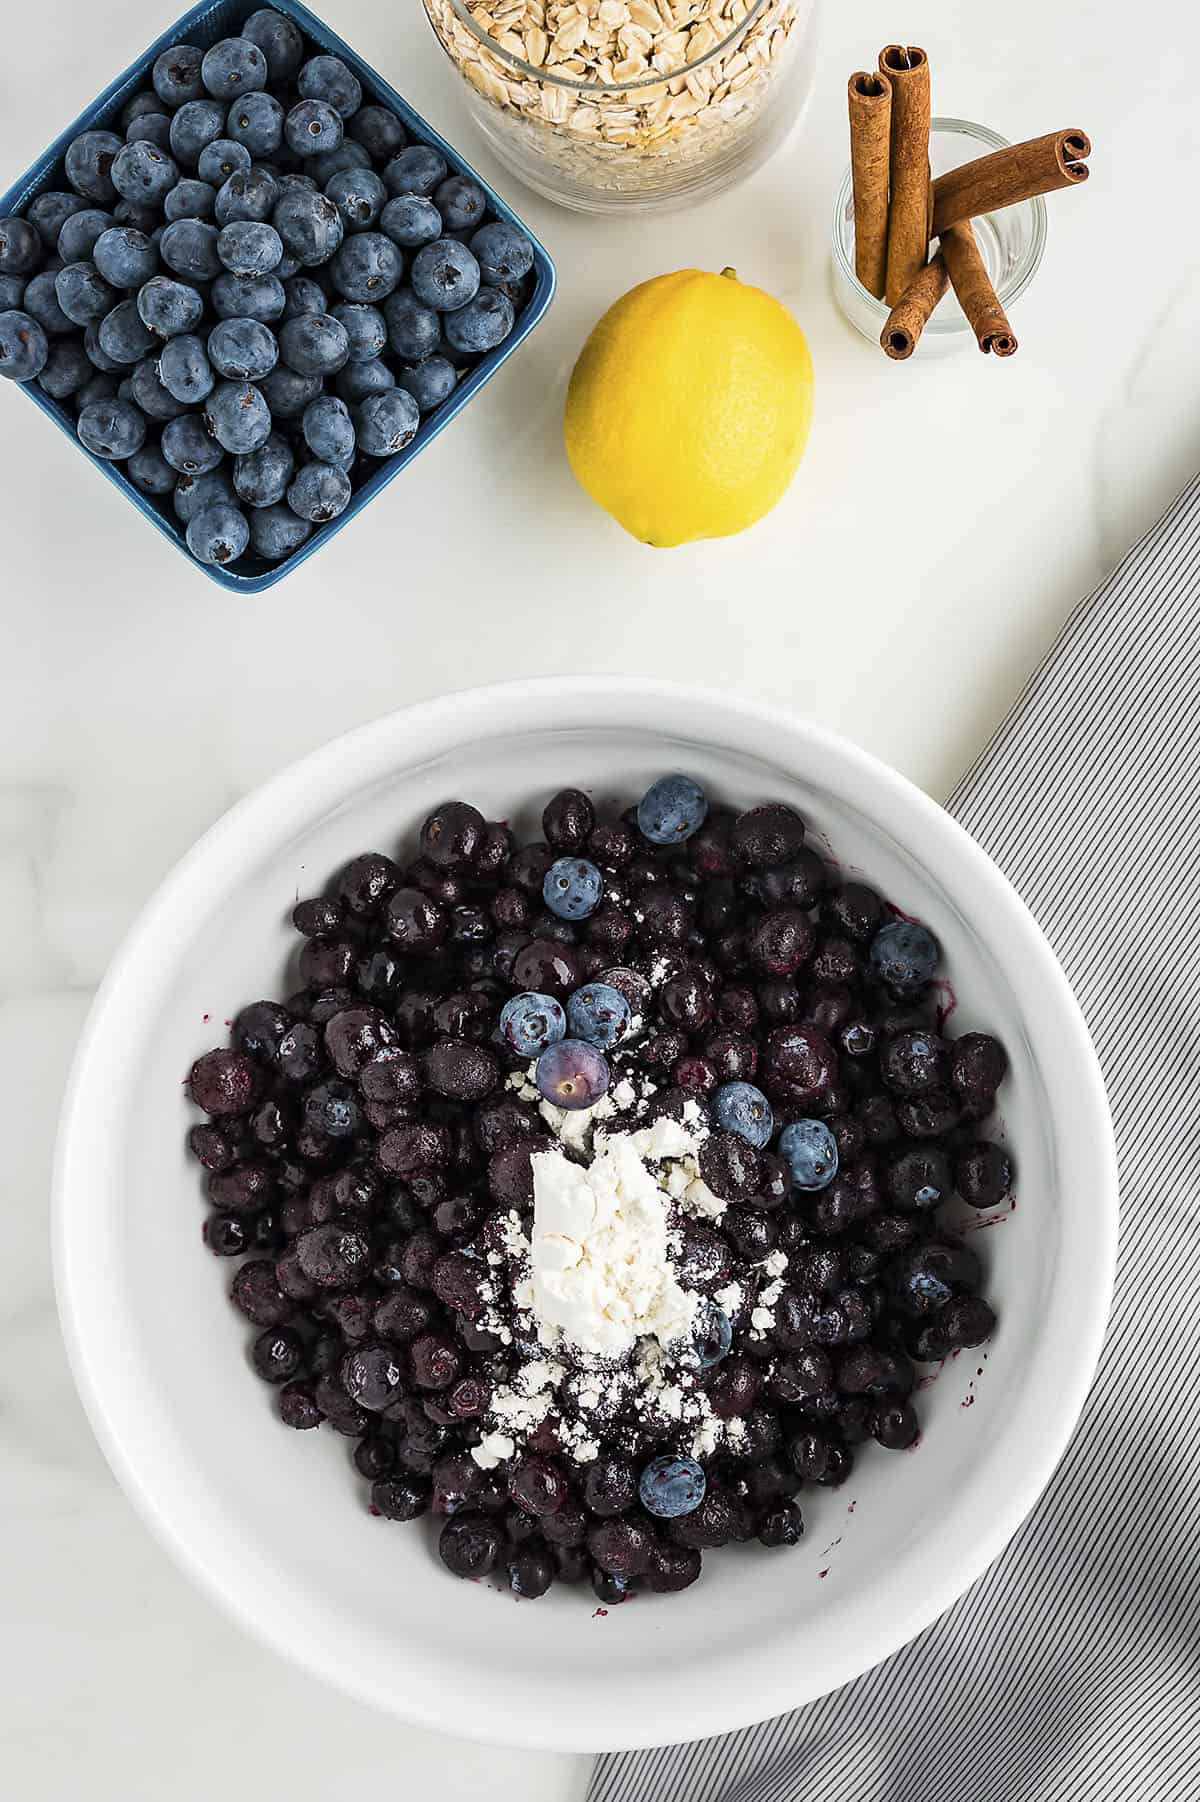 Blueberries in a bowl with flour.